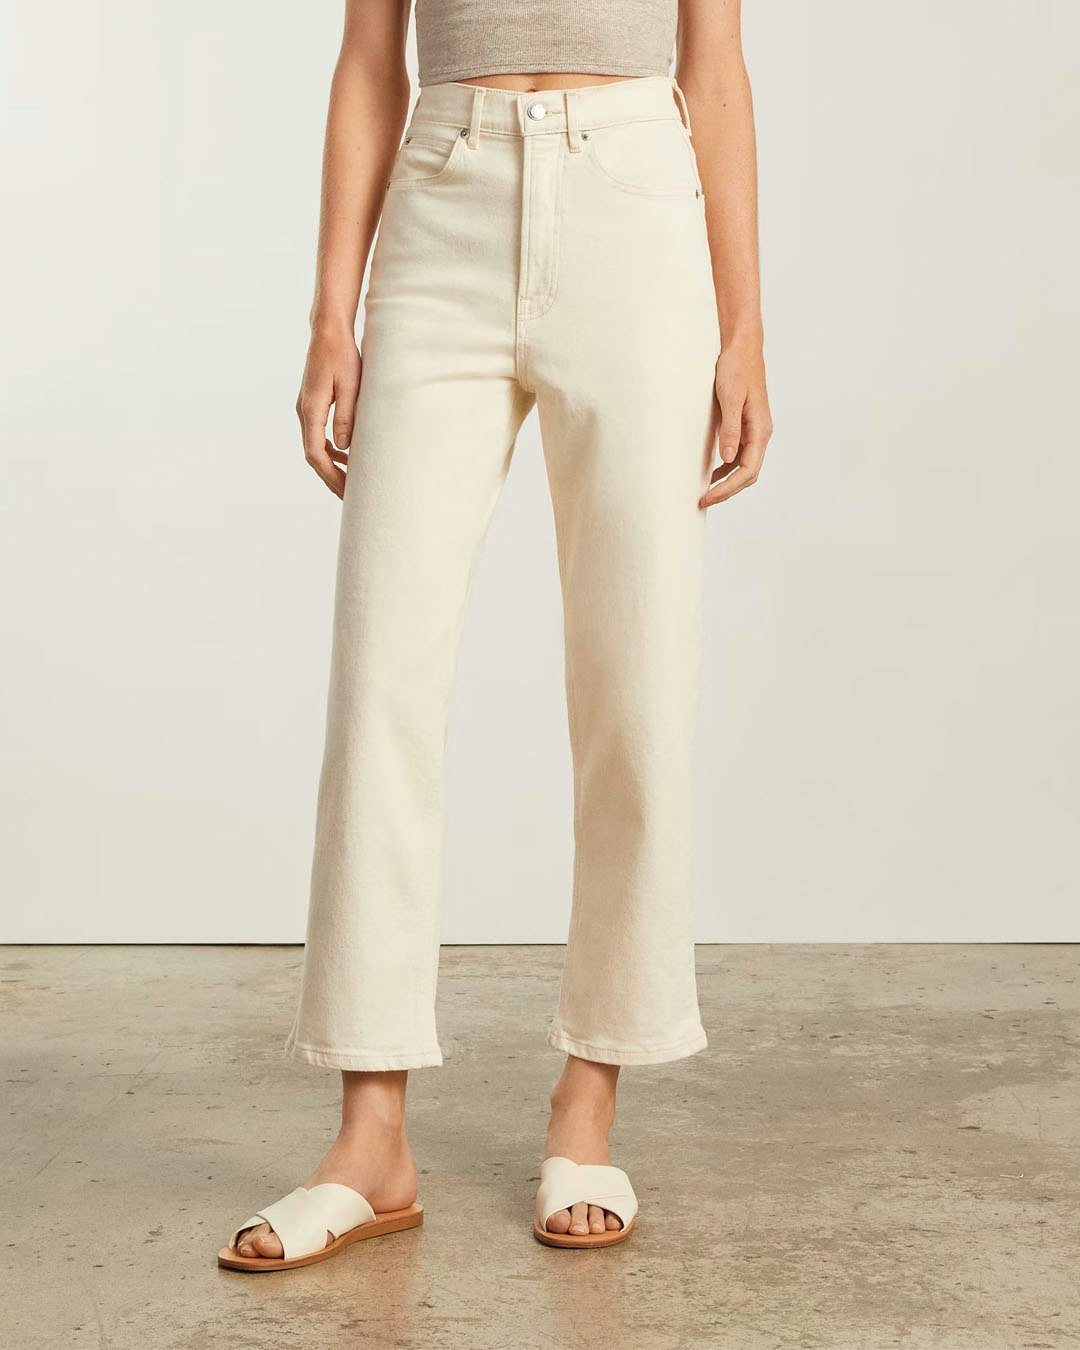 Everlane's Under $75 High Rise Skinny Jeans Are the Best White Jeans For  Summer - Fashion Jackson